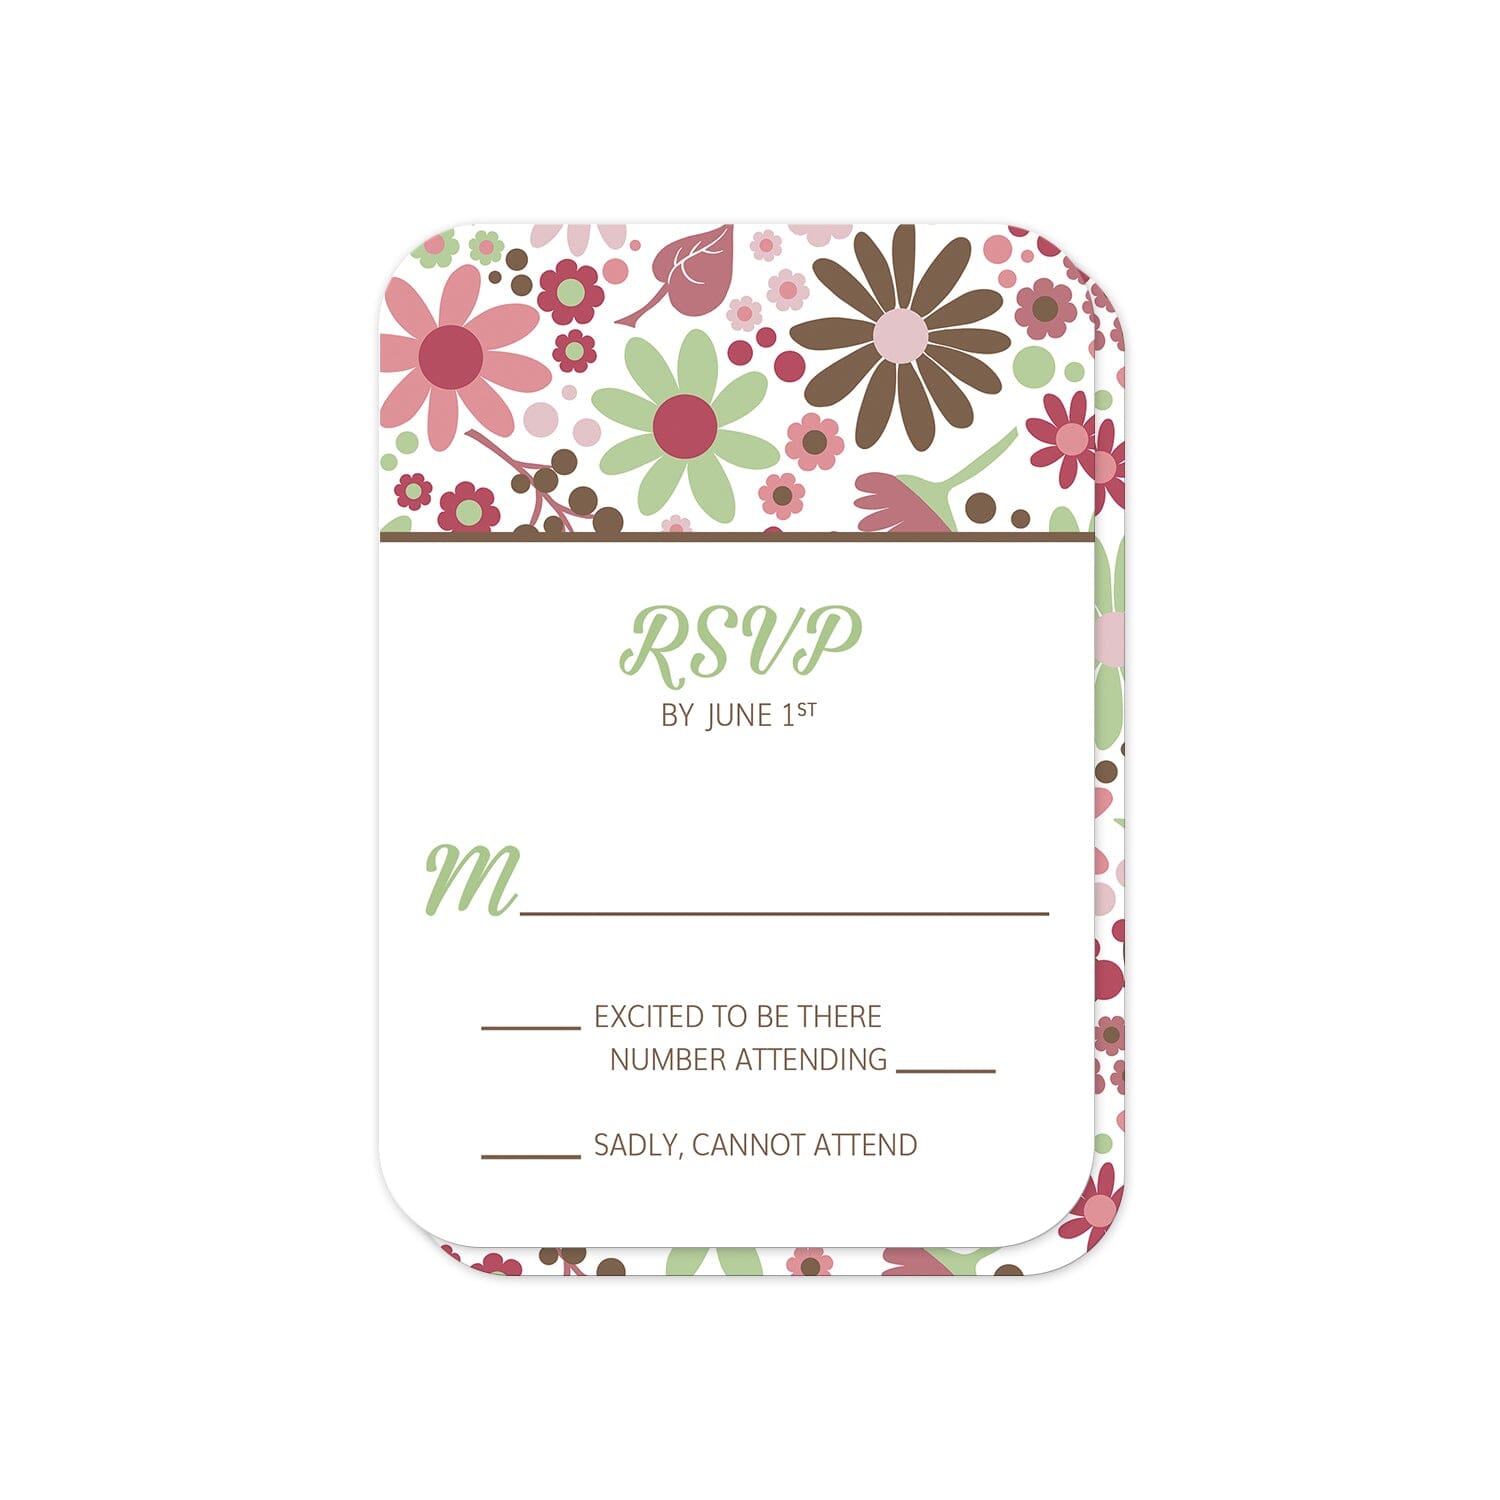 Berry Green Summer Flowers RSVP cards (front with rounded corners) at Artistically Invited.